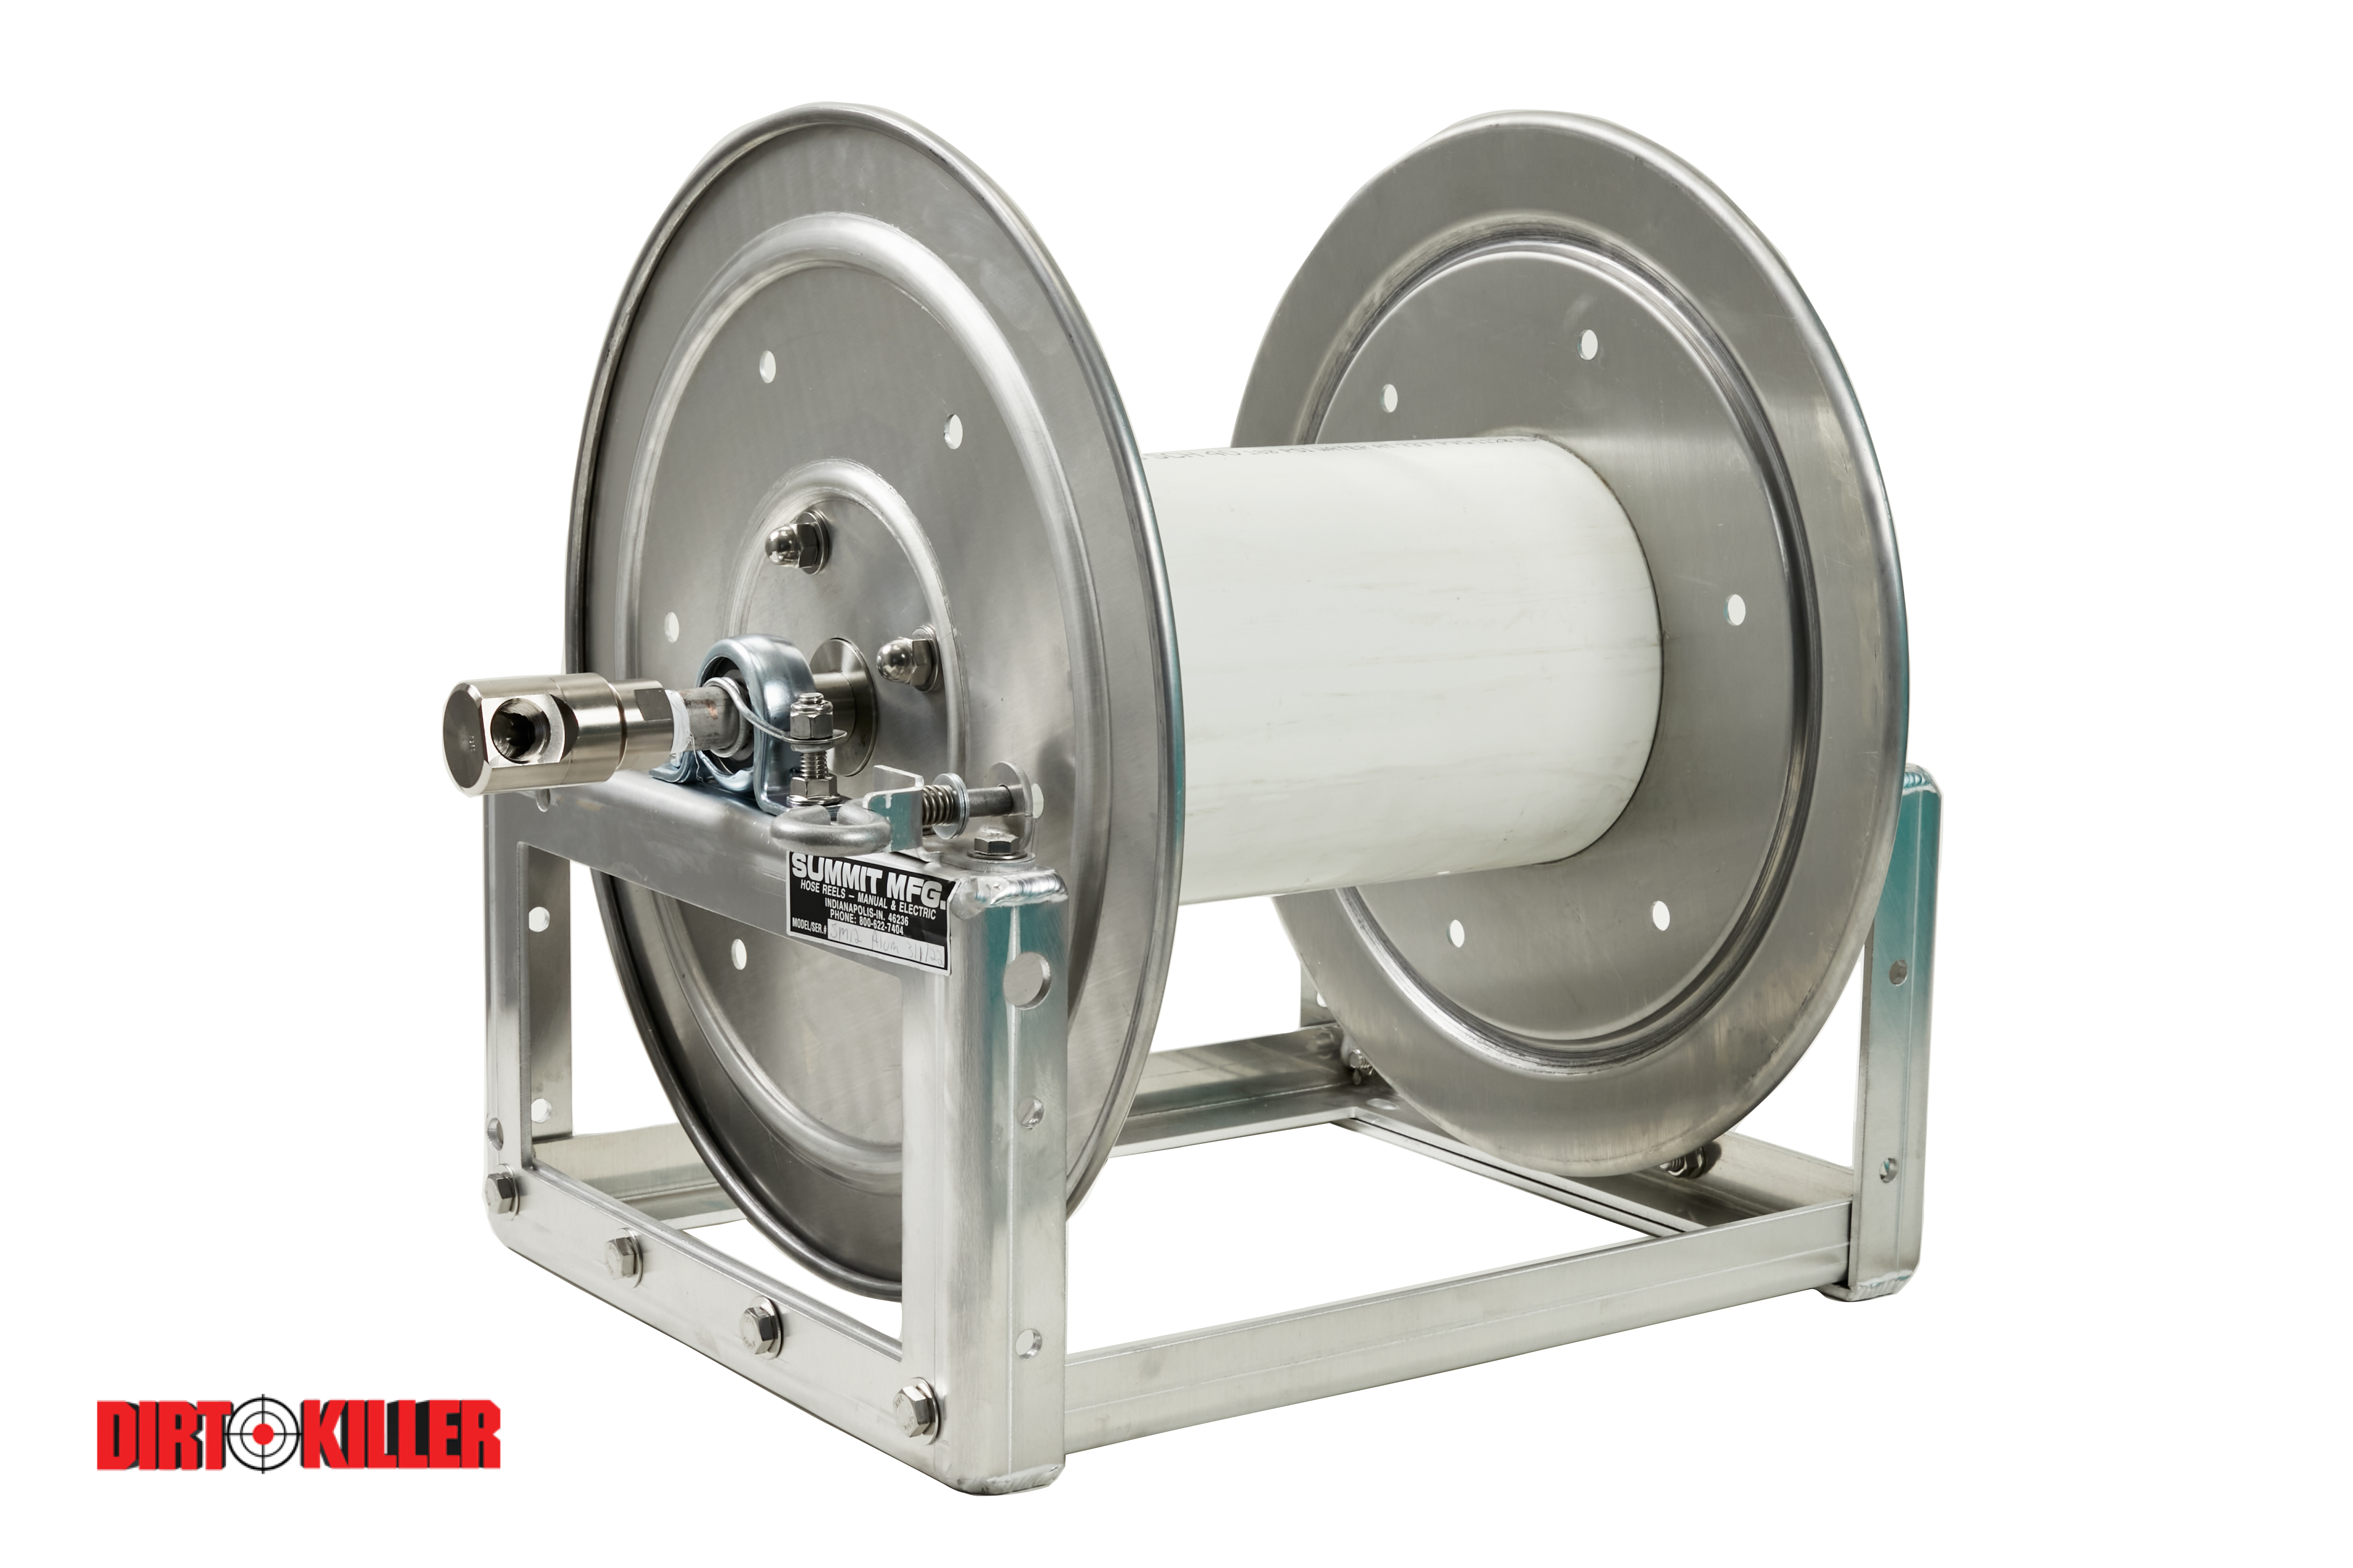 Summit Hose Reel SM12 Aluminum Externals With Stainless Manifold, Fits 200' of 1/2" Ag Hose-image_1